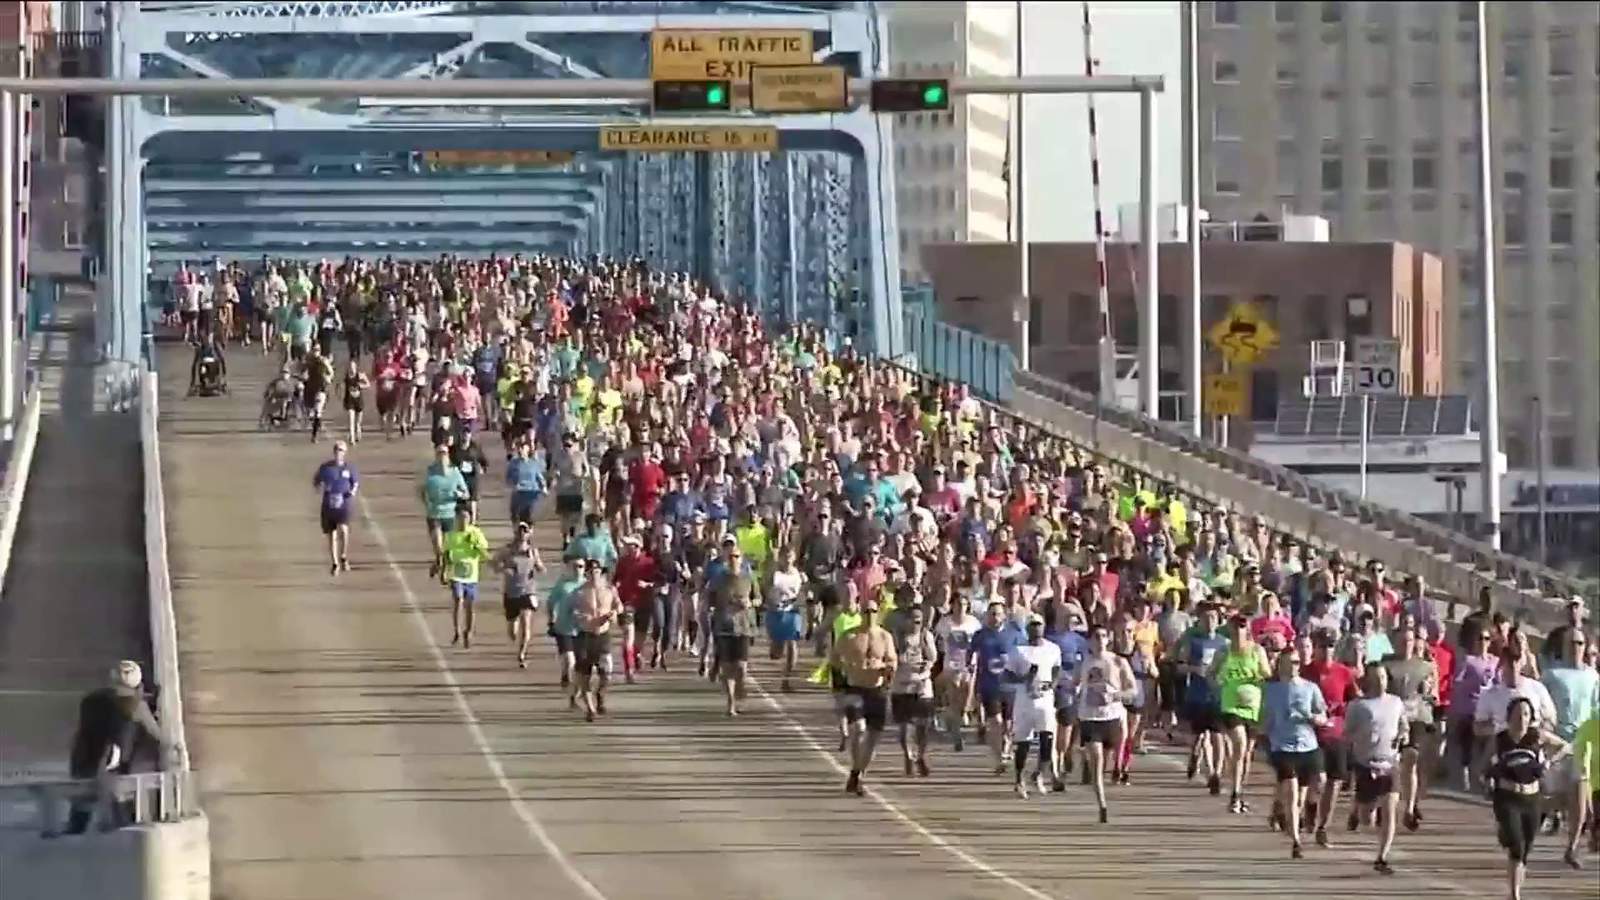 Road closures for the Gate River Run